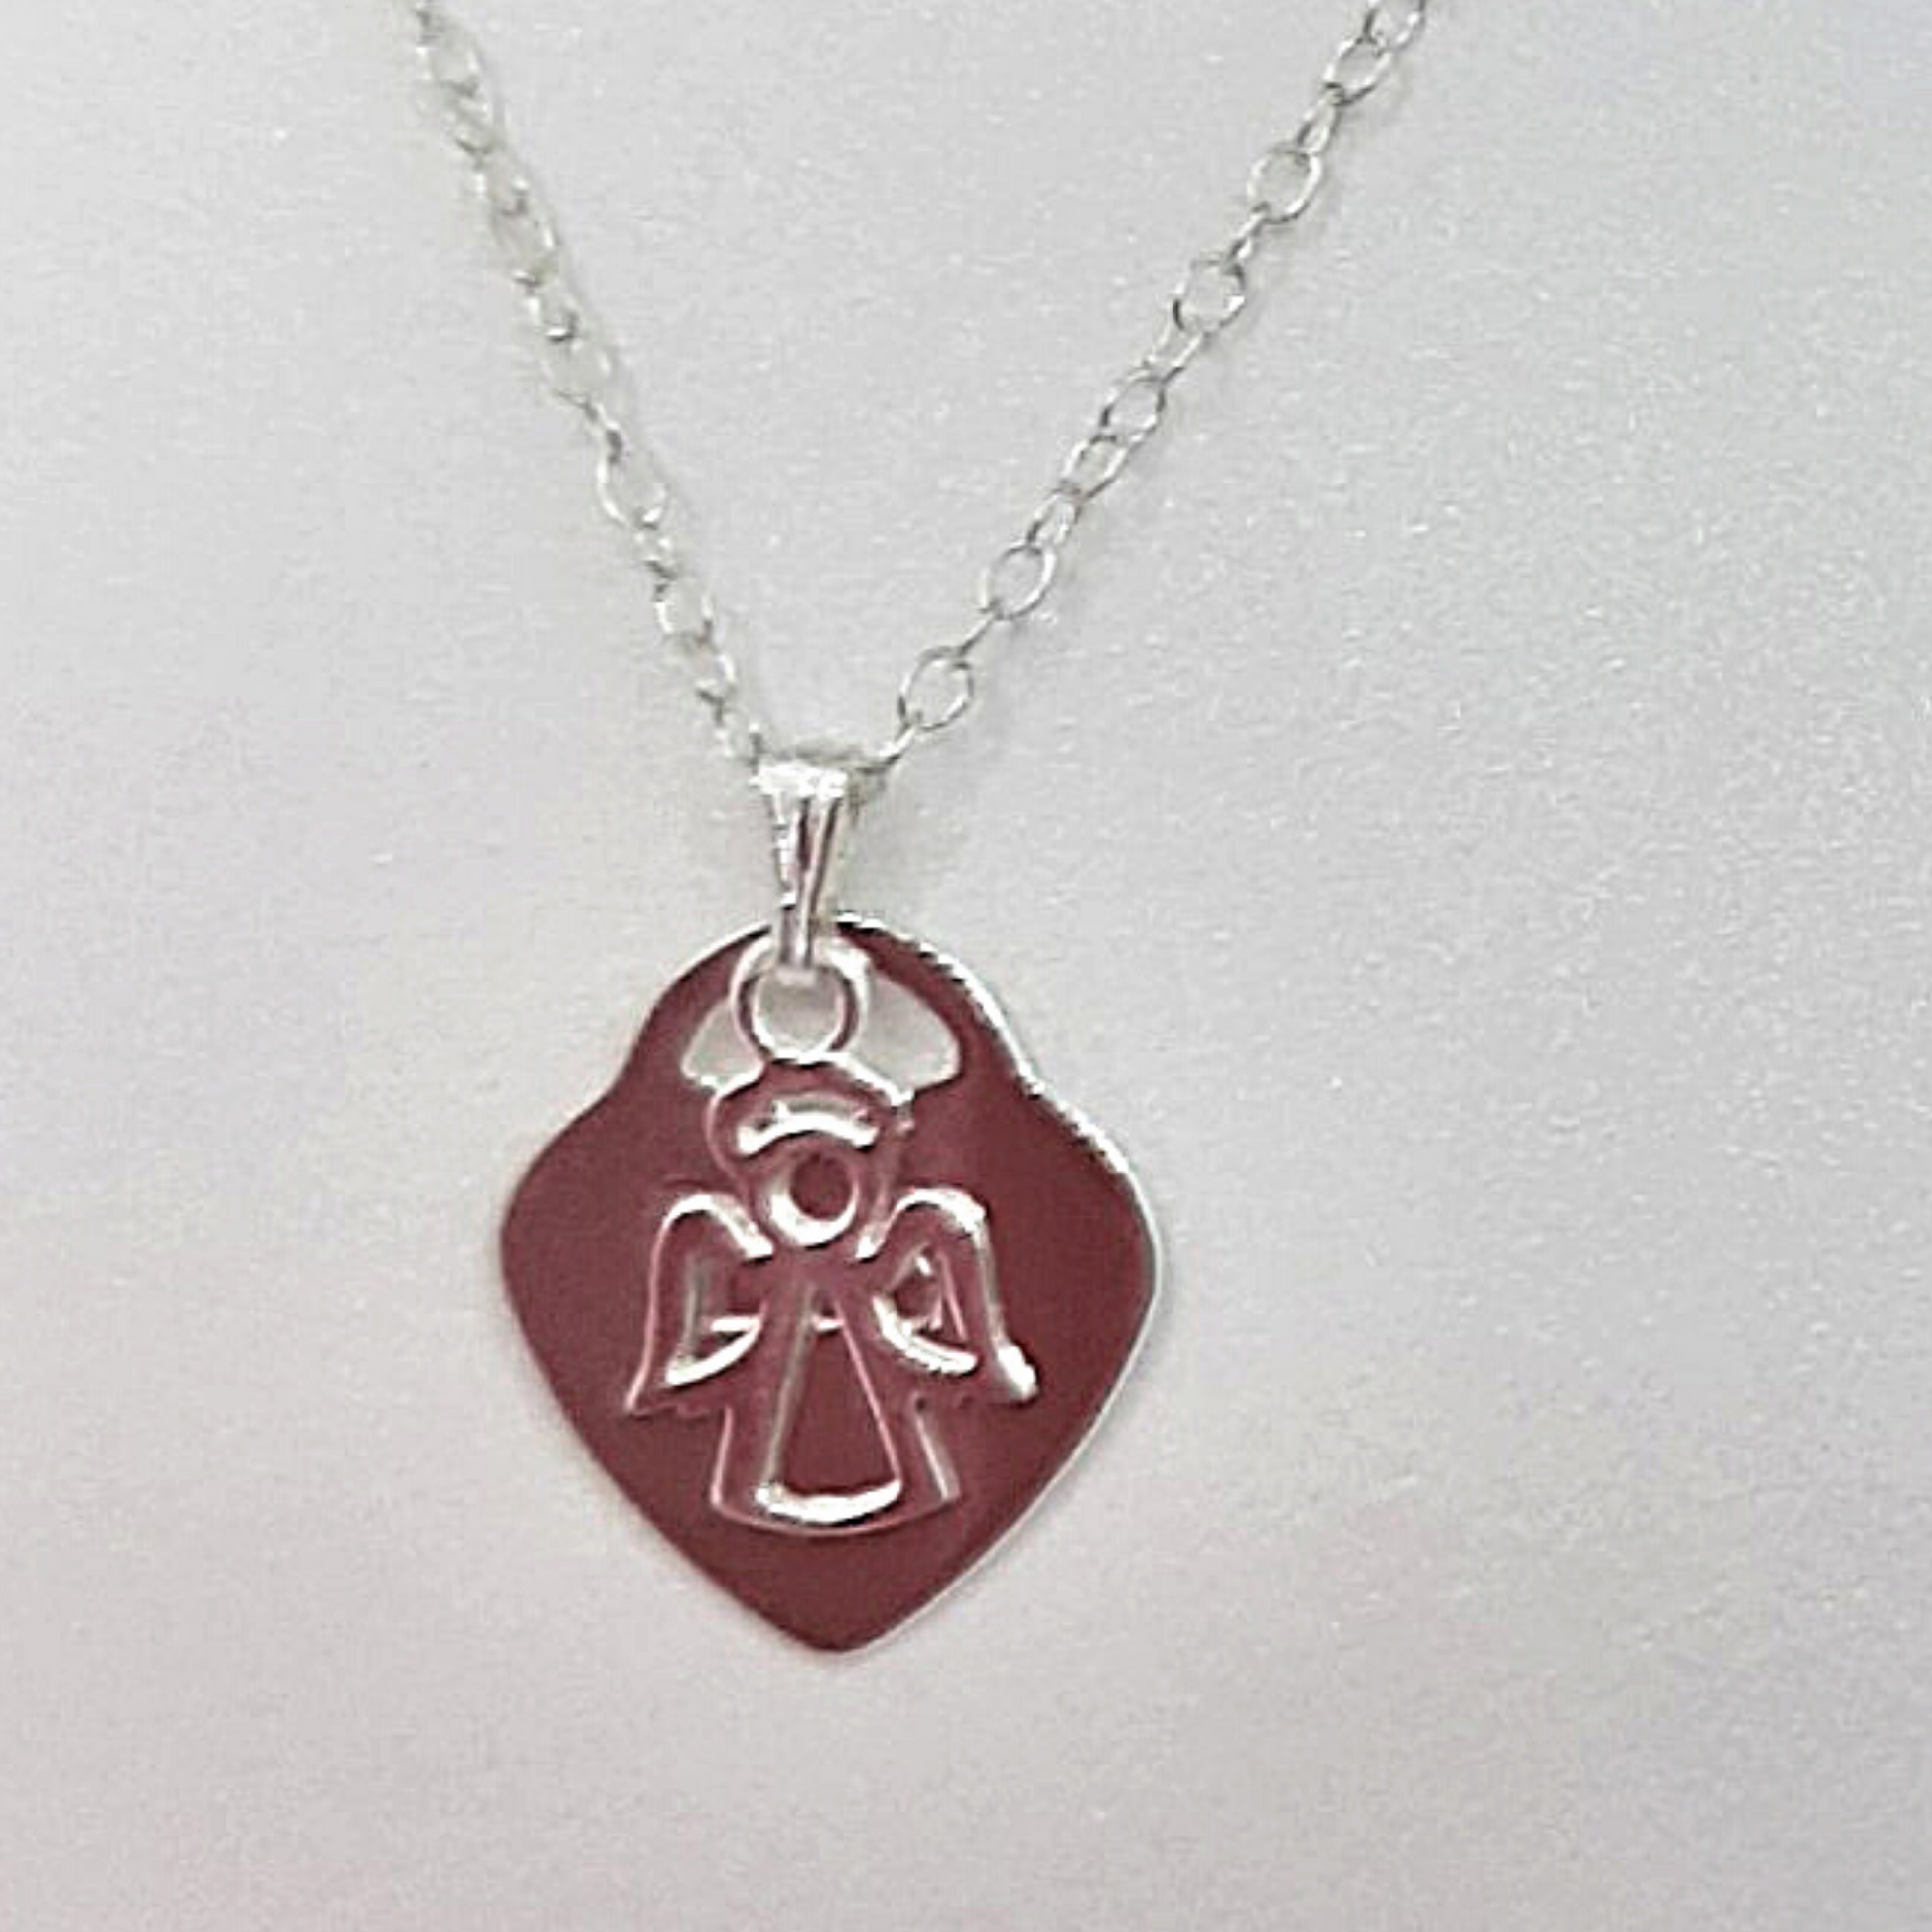 Sterling silver angel charm hung on a pendant with a sterling silver heart. Heart can be  engraved with the name of your choice.